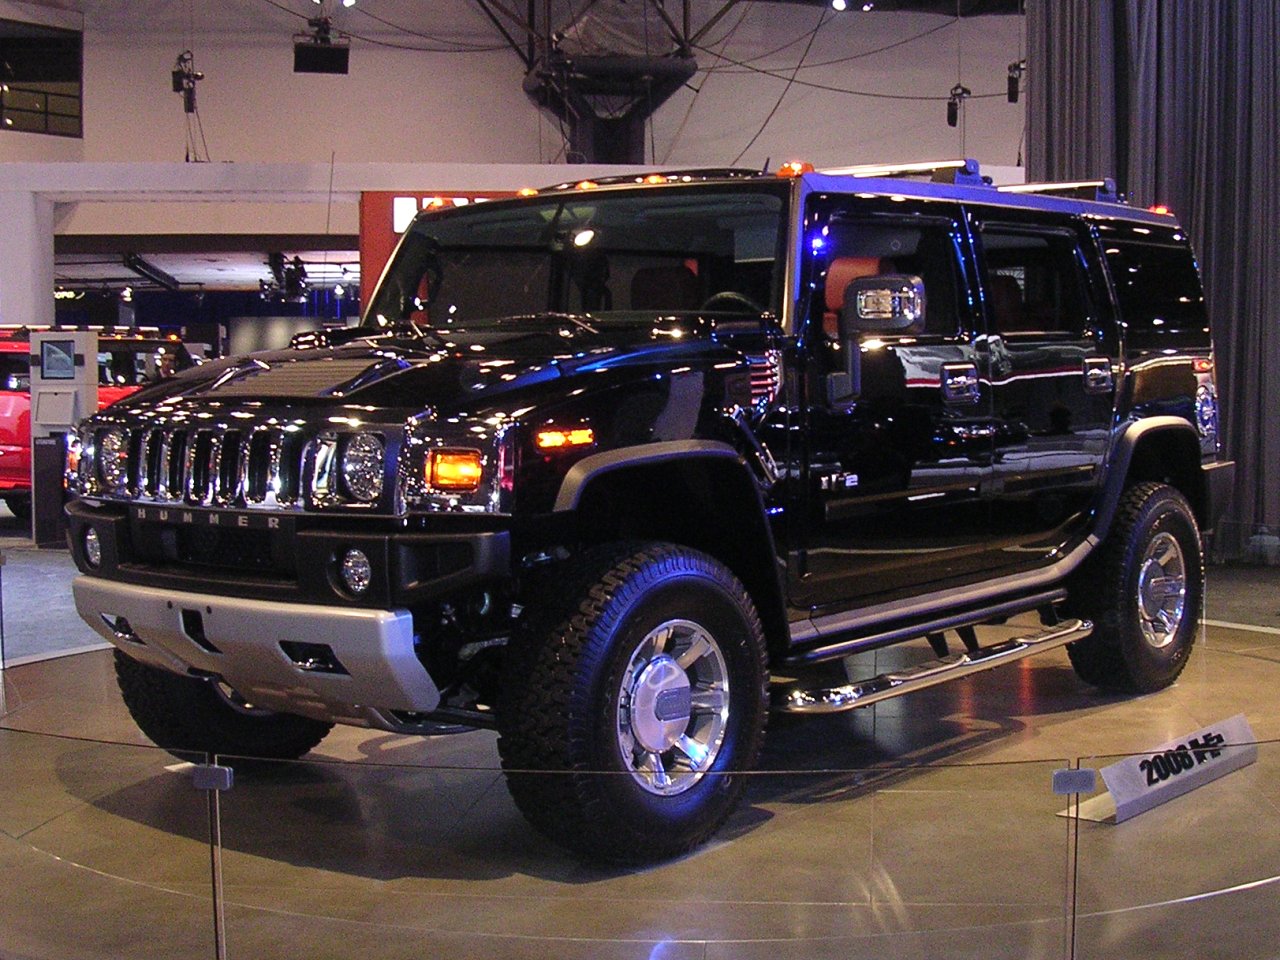 Hummer H2 Luxe